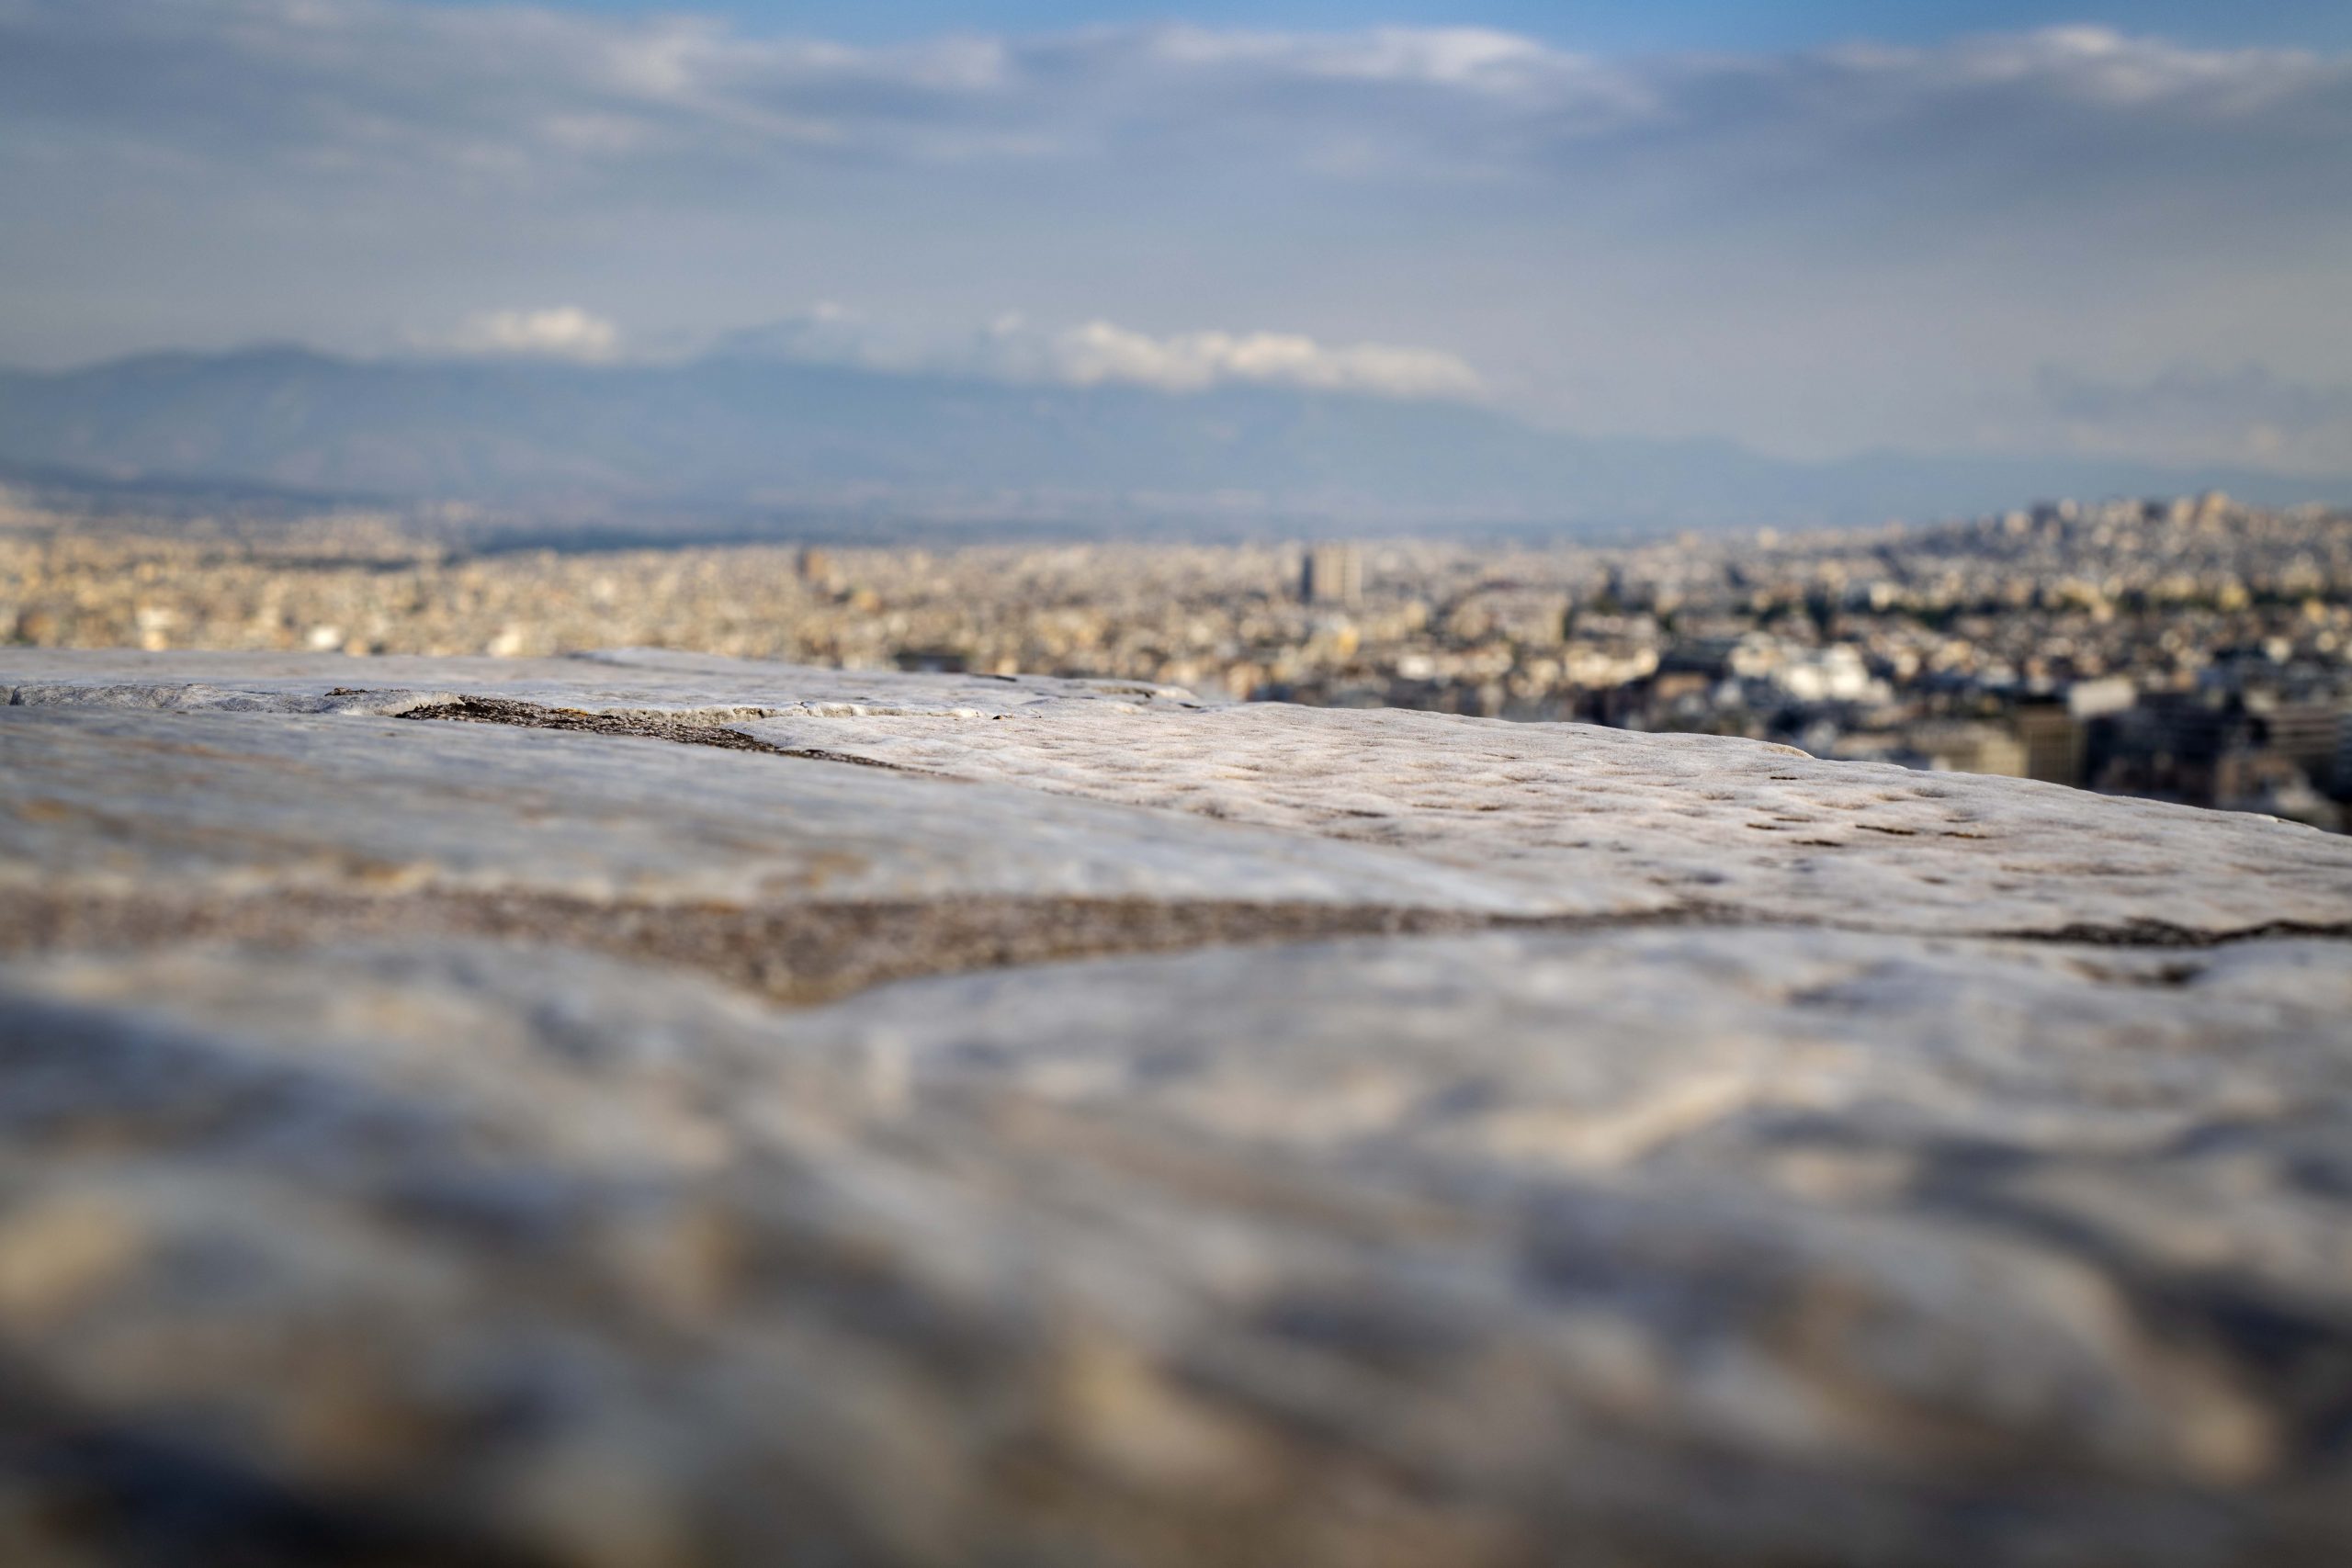 Athens, Parthenon, city, mountain, clouds, ancient Greek, philosophy, travel, journey, Greece, history, wisdom, courage, civilisation, law, justice, image, picture, print, snapshot, photography, modern, present-day, current, fashionable, latest, ultra-modern, newfangled, modish, in vogue, à la mode, conceptual, intellectual, philosophical, academic, hypothetical, symbolic impressionistic, unique style, limited edition, one-off, original, home decor, interior decoration, creator, photographer, abstract art, modern art, painting with light,